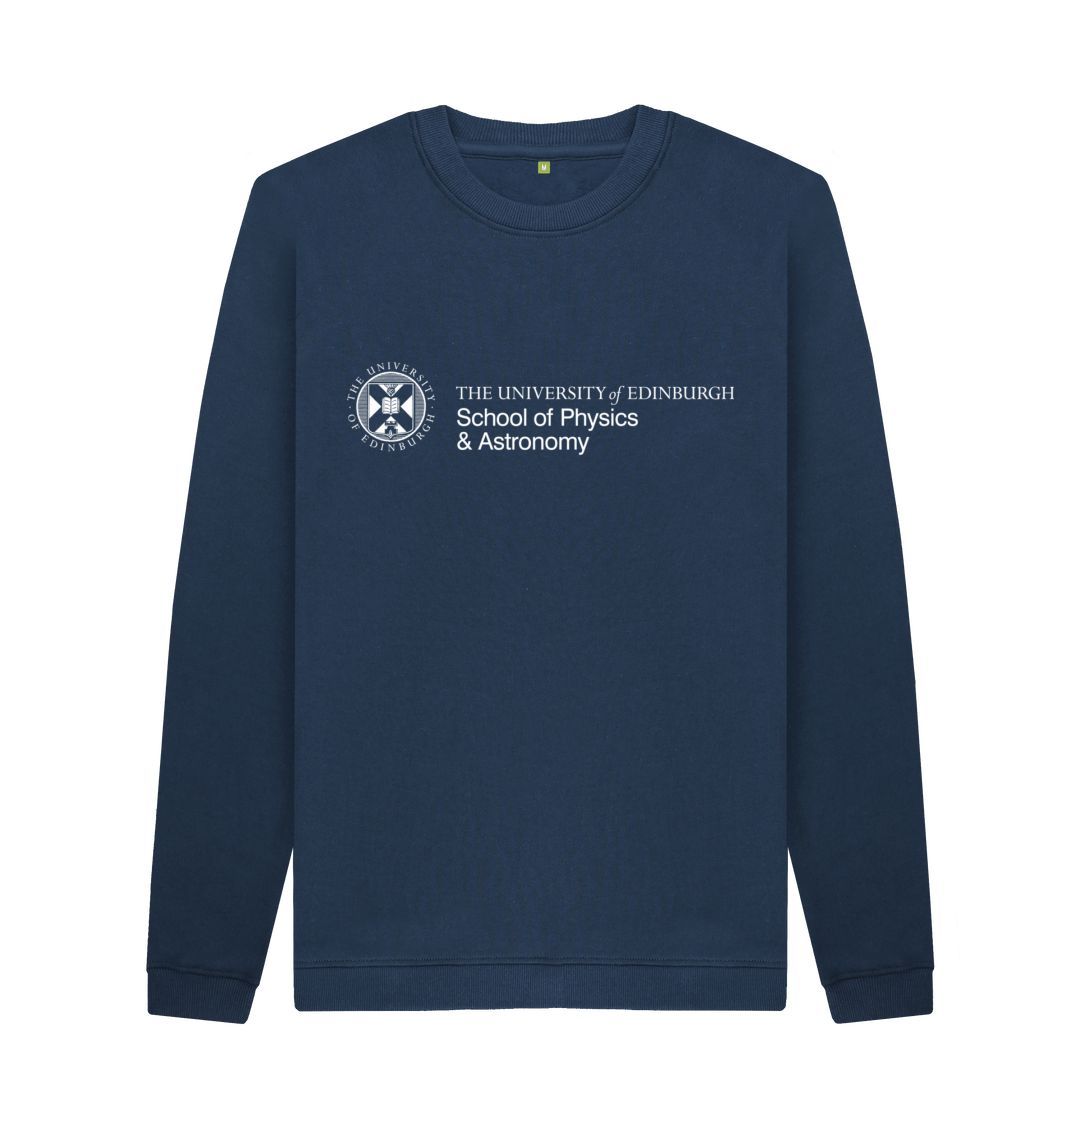 Navy sweatshirt with white University crest and text that reads ' University of Edinburgh School of Physics and Astronomy